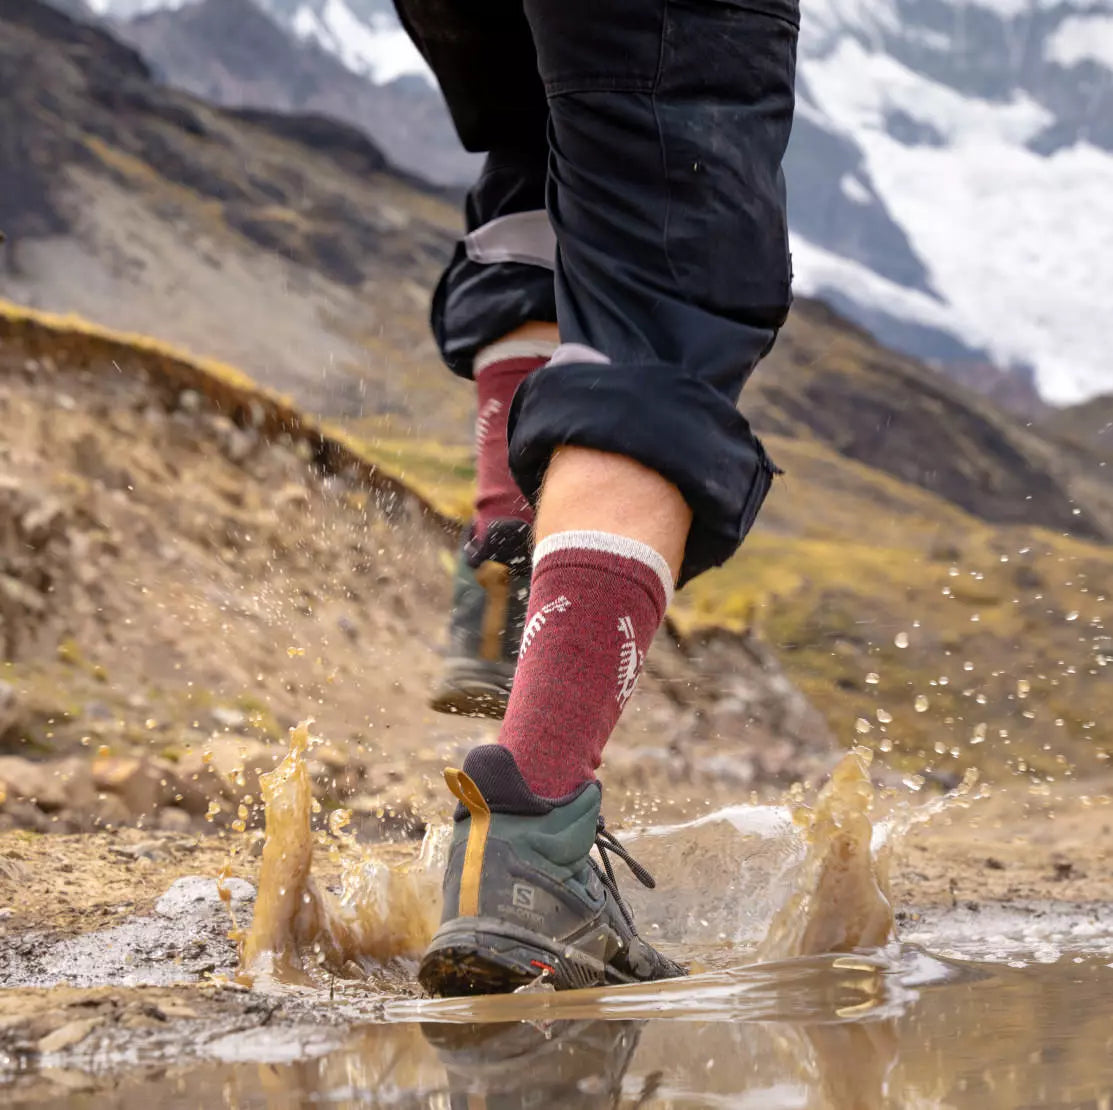 A hiker wearing our costa socks walking over a puddle of water